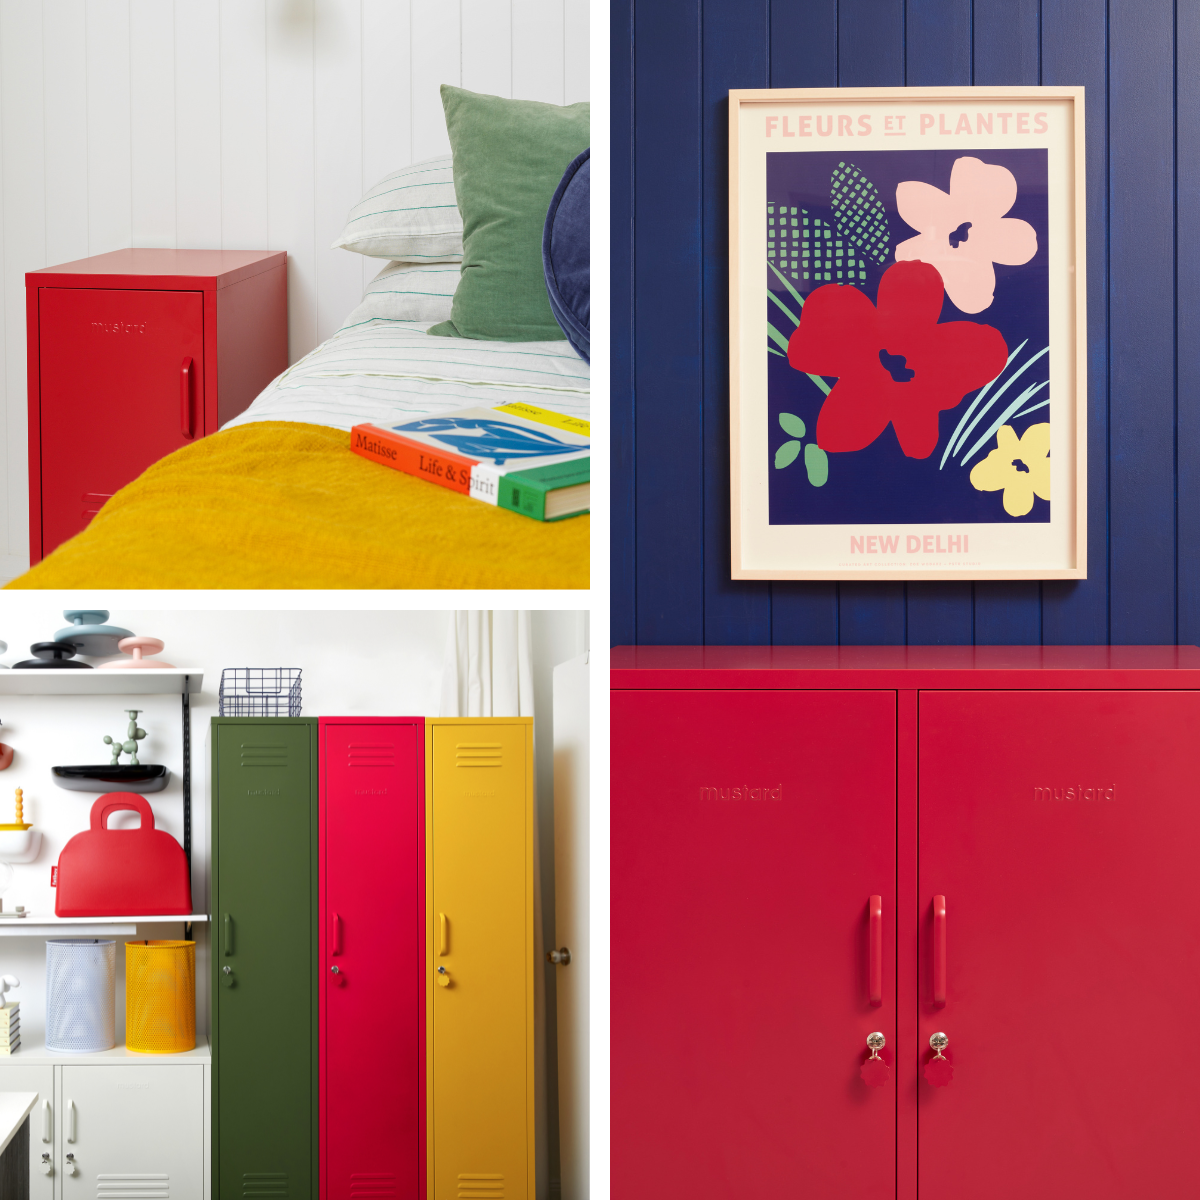 Modern retro inspired images, featuring Poppy, Mustard and Olive lockers.